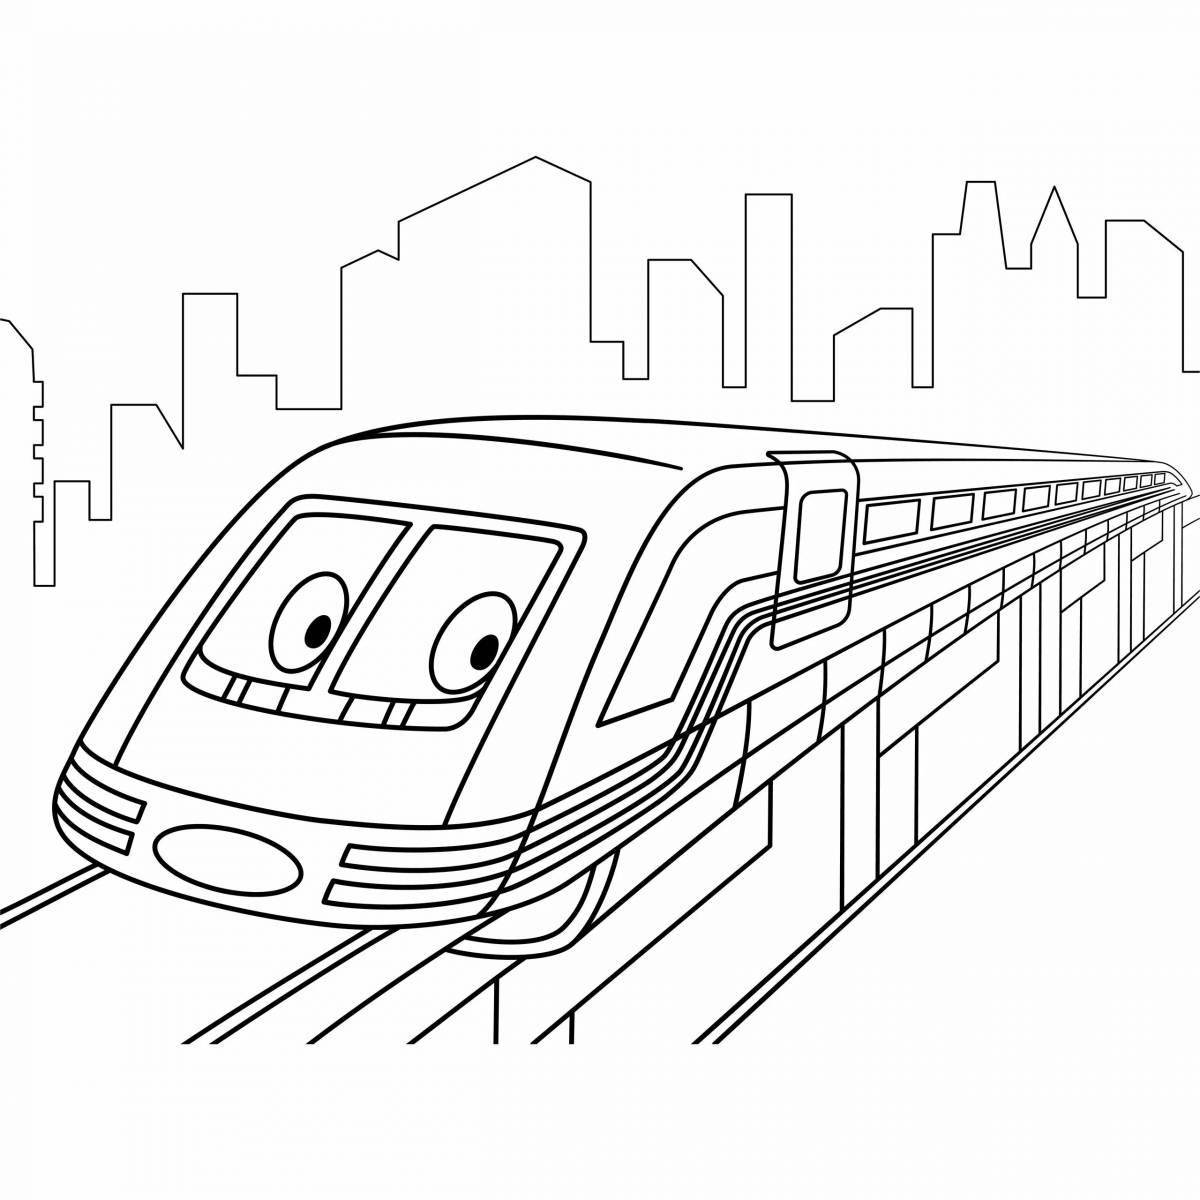 Coloured subway coloring book for children